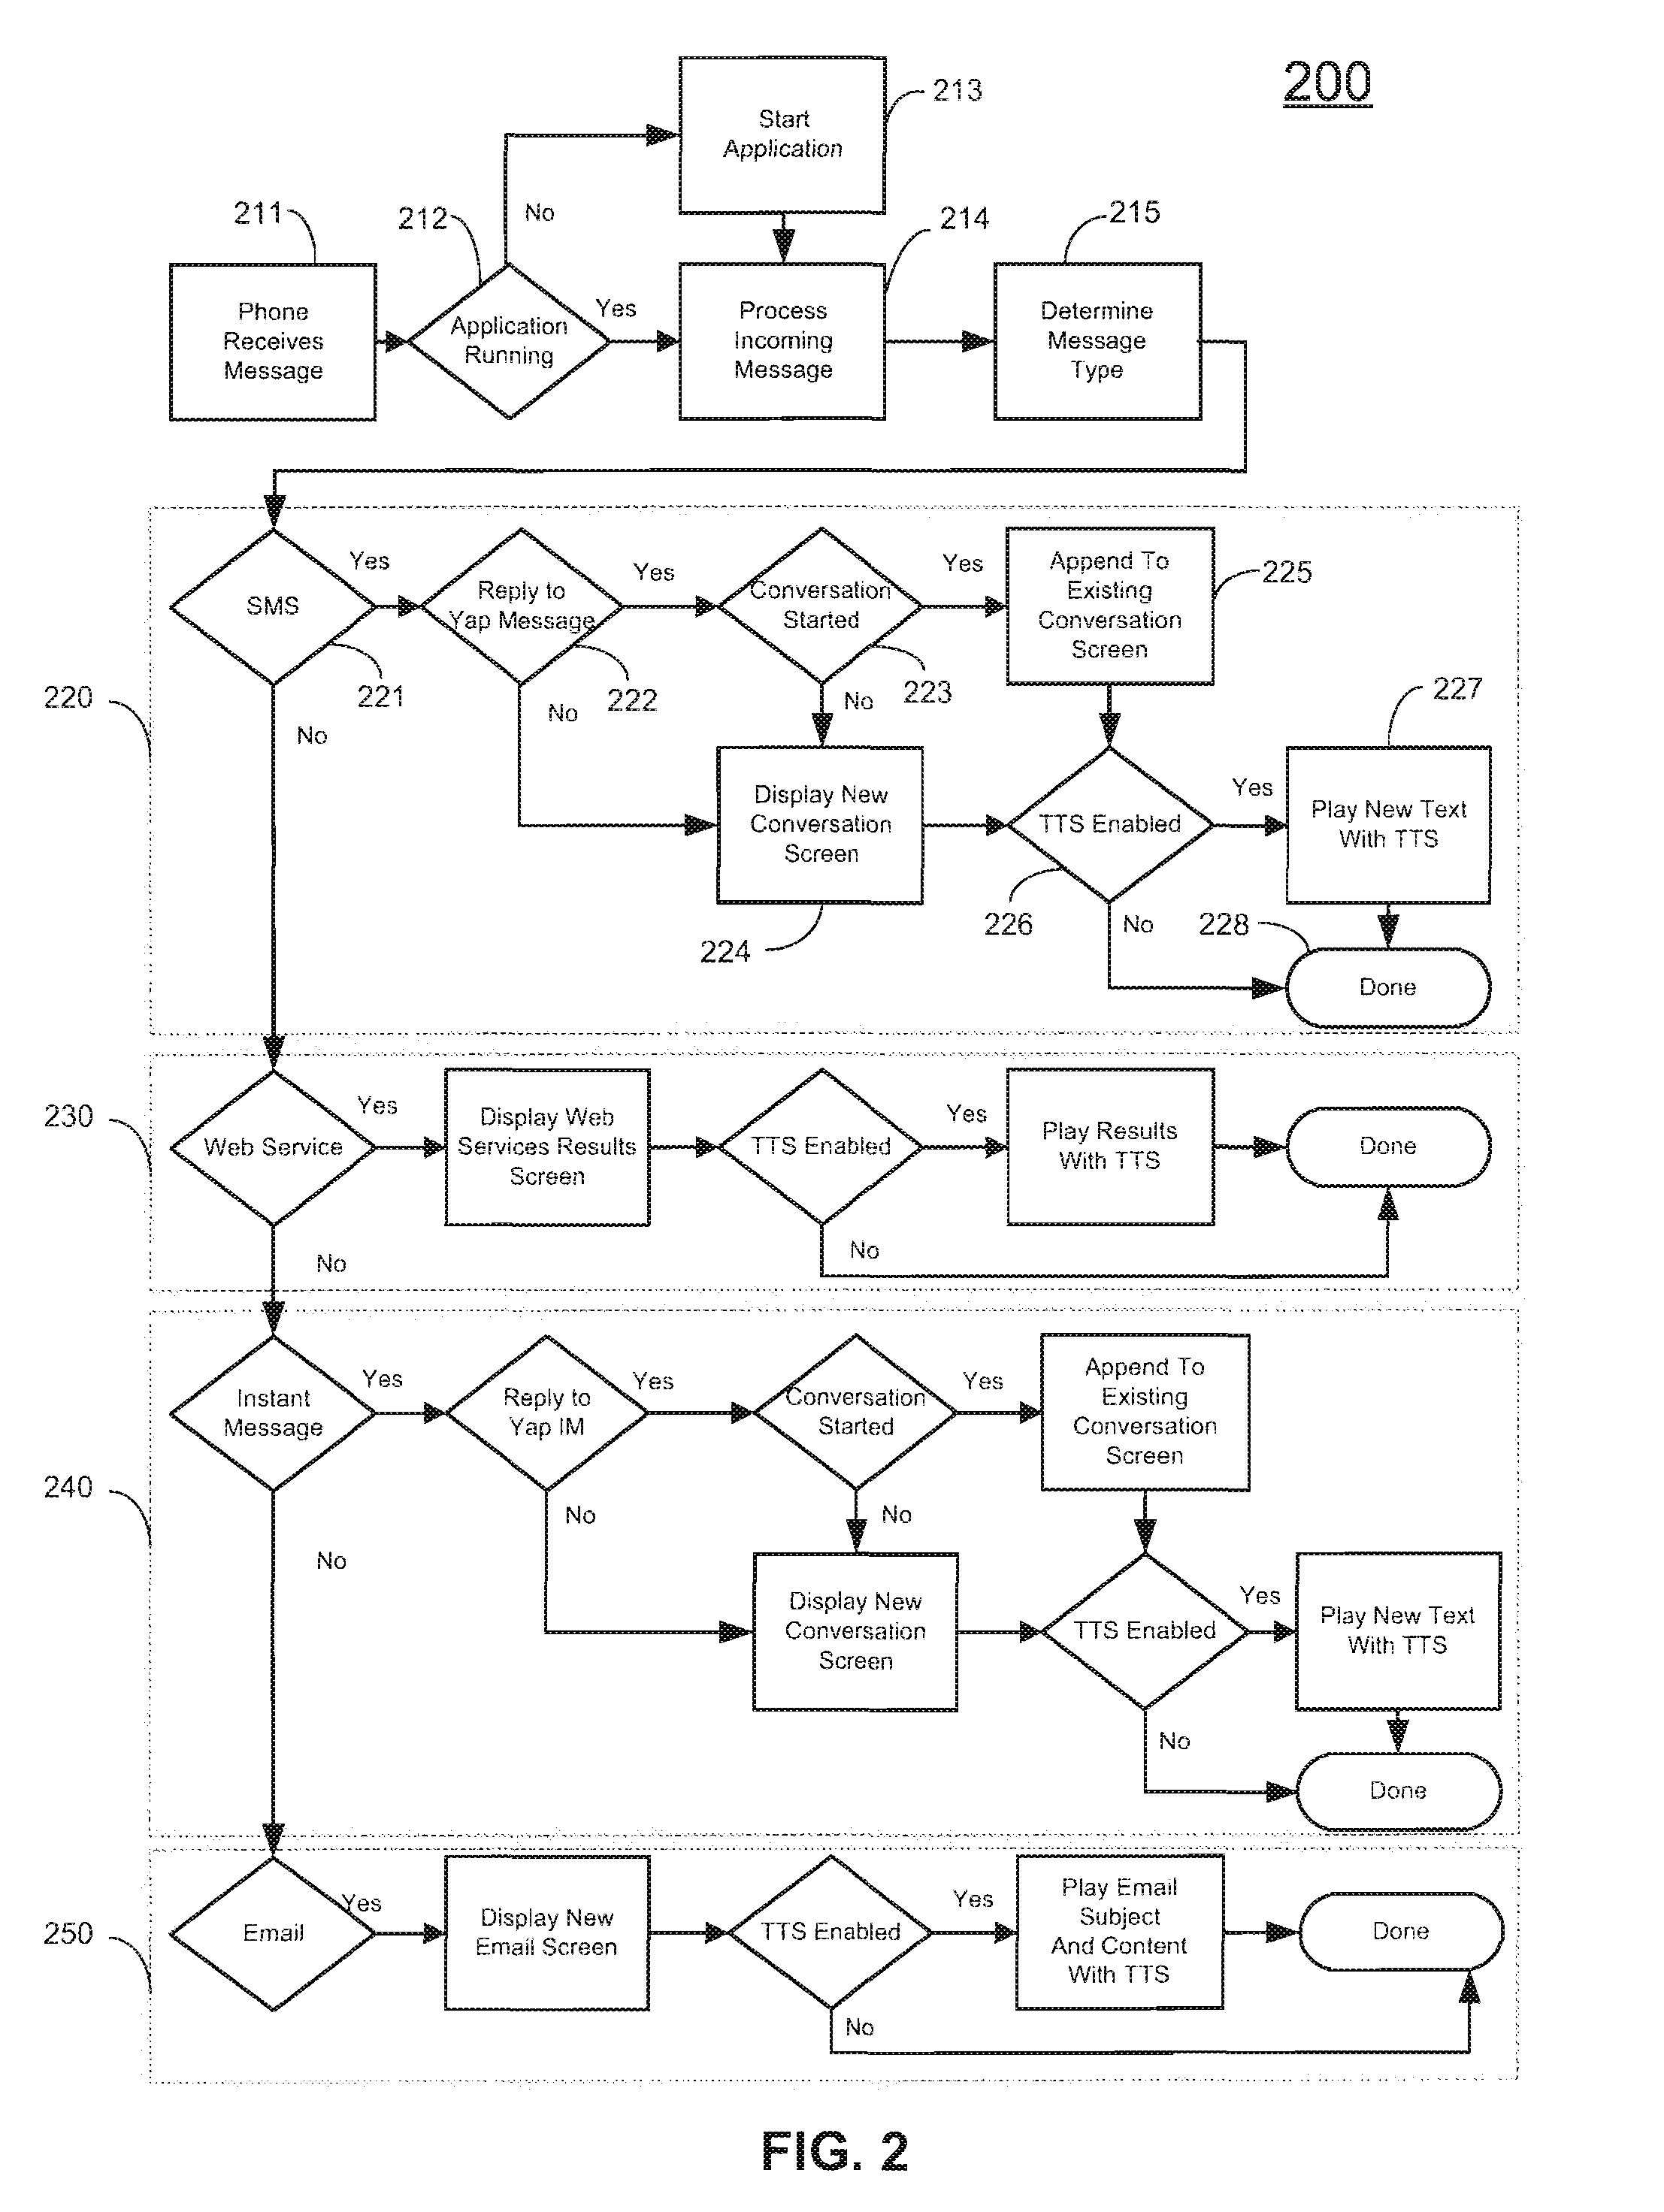 Hosted voice recognition system for wireless devices